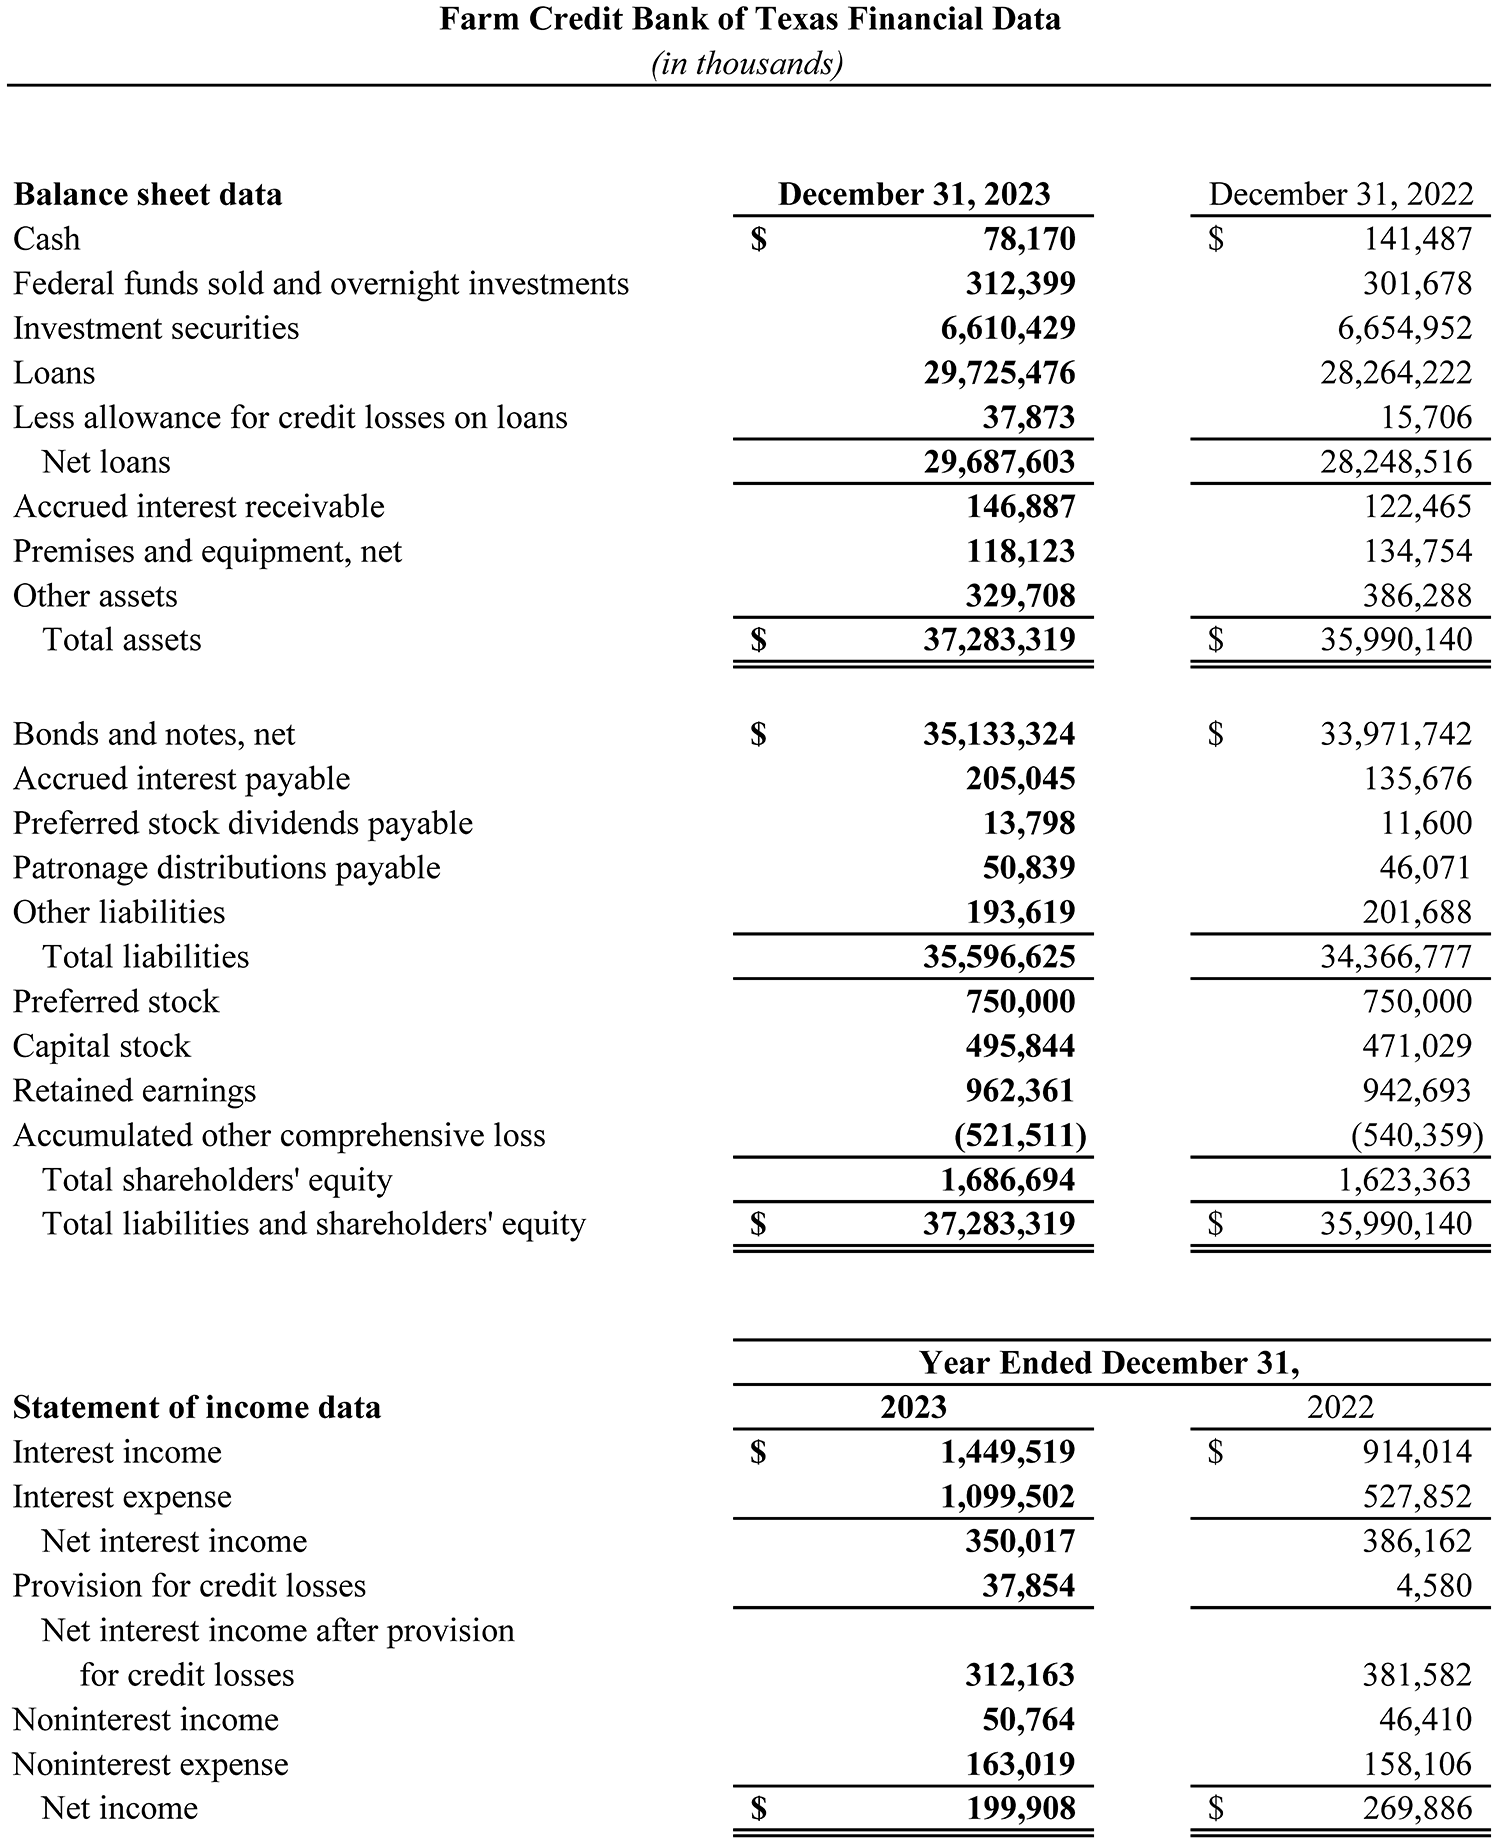 Snapshot of Farm Credit Bank of Texas' year-end (2023) financial results